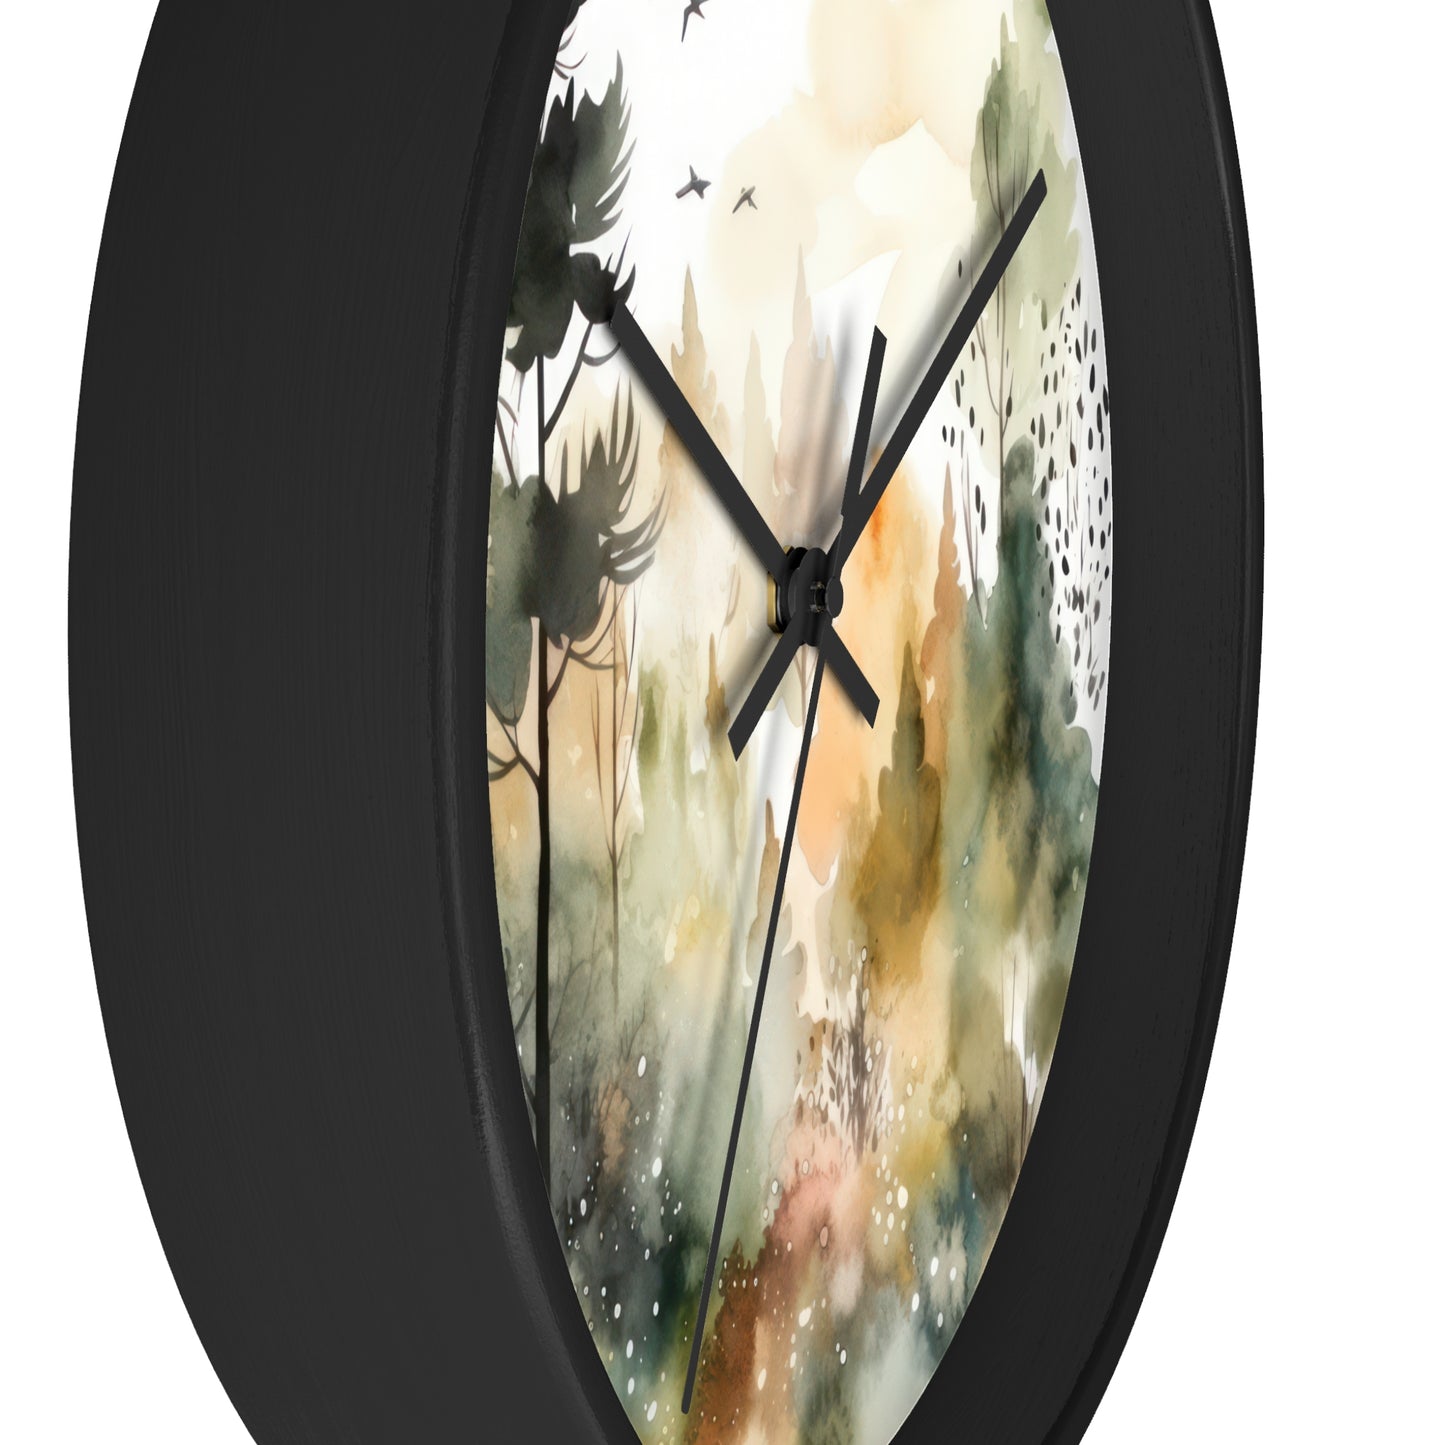 Calm Forest Design Wall Clock featuring a serene nature-inspired timepiece, perfect for stylish home decor, elegant living room accents, contemporary design, and modern interior time-telling elegance.